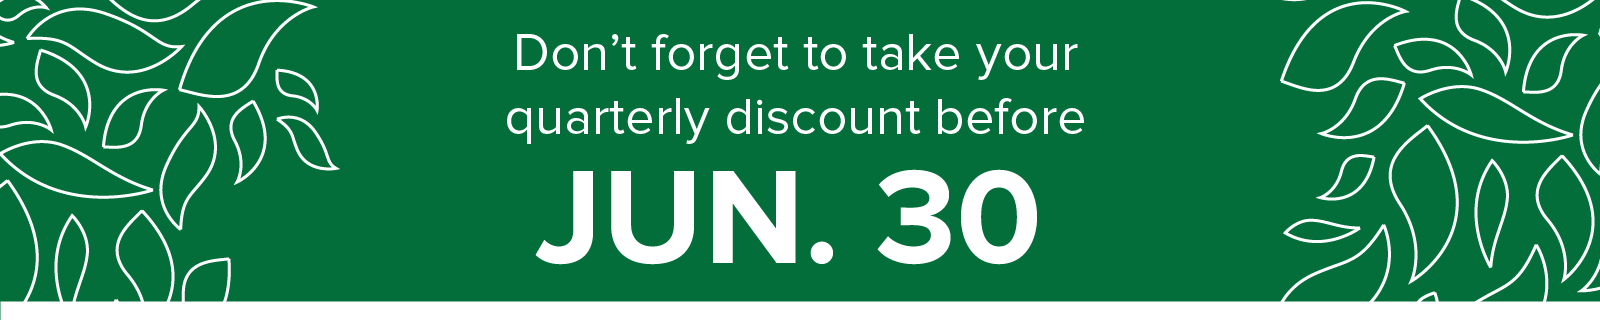 Don't forget to take your quarterly owner discount by June30